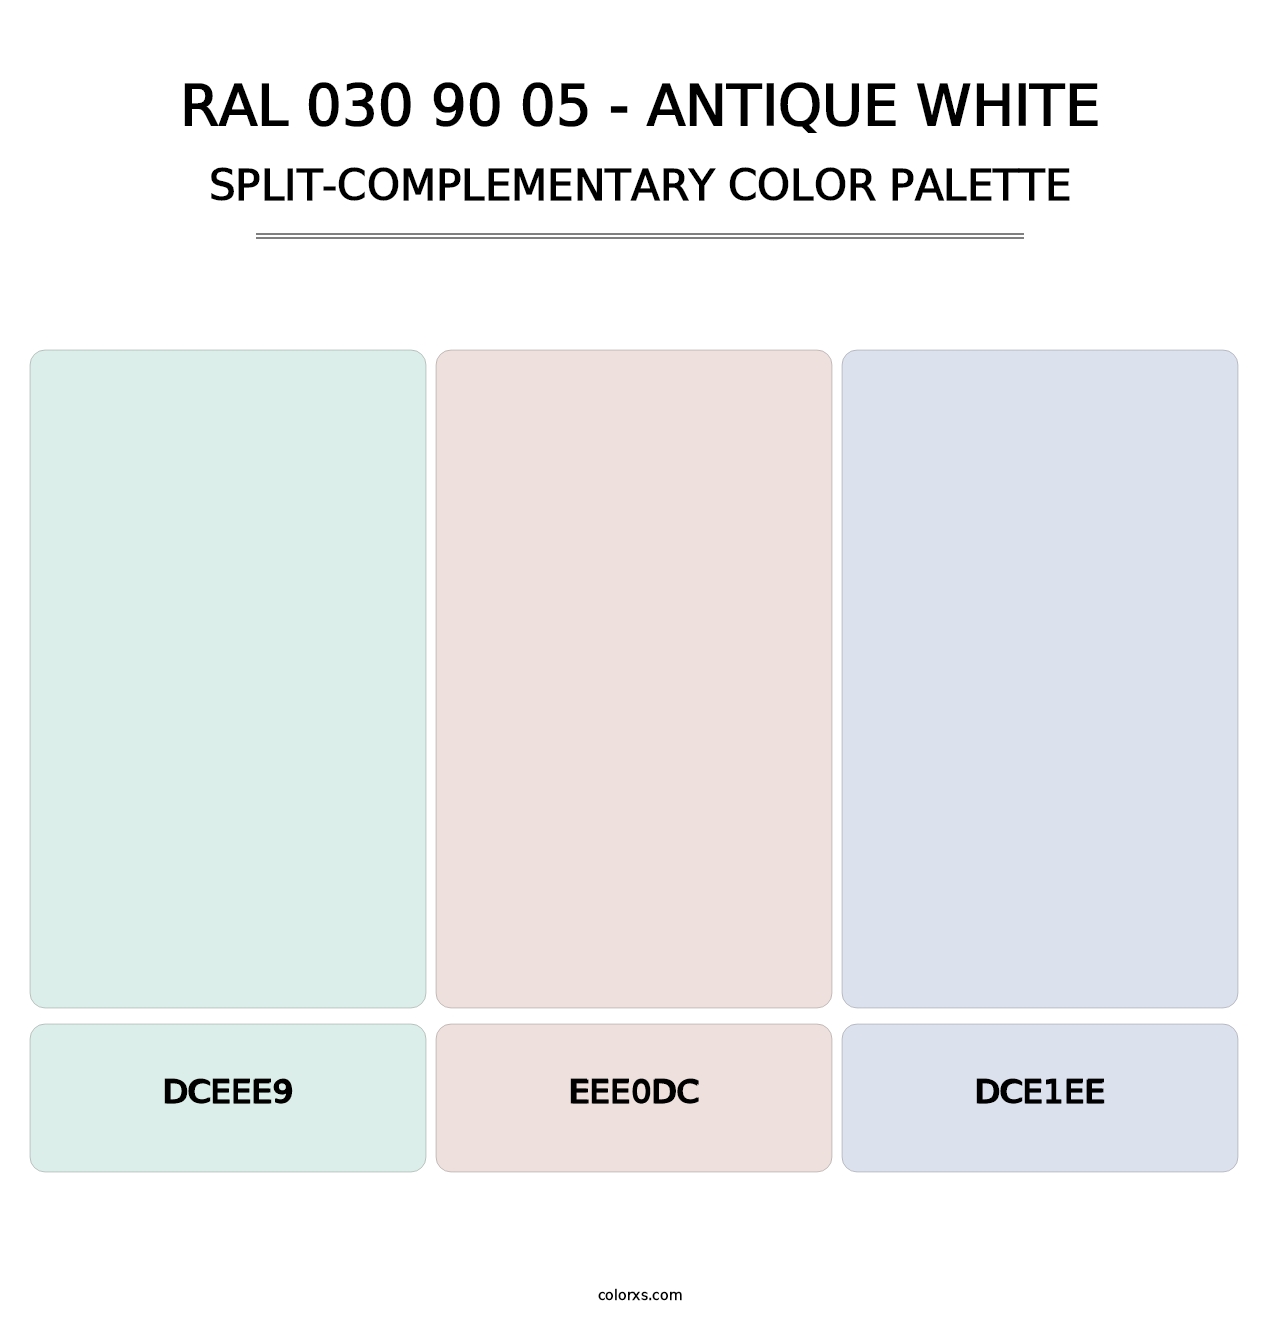 RAL 030 90 05 - Antique White - Split-Complementary Color Palette